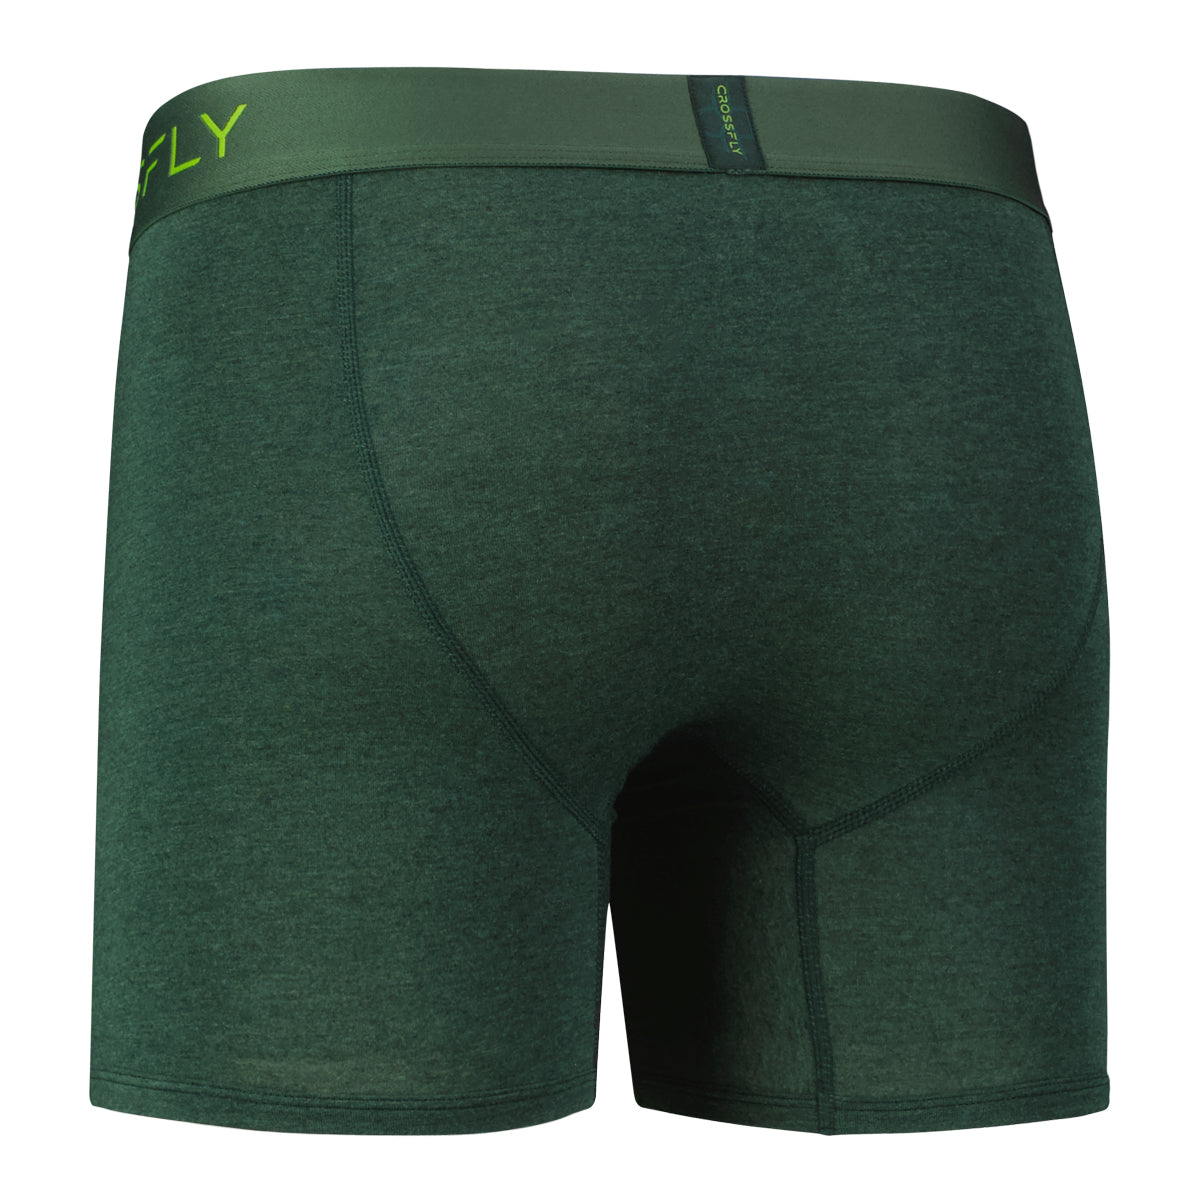 The Perfect Fit: Ideal Underwear for Men's Comfort and Confidence - Crossfly